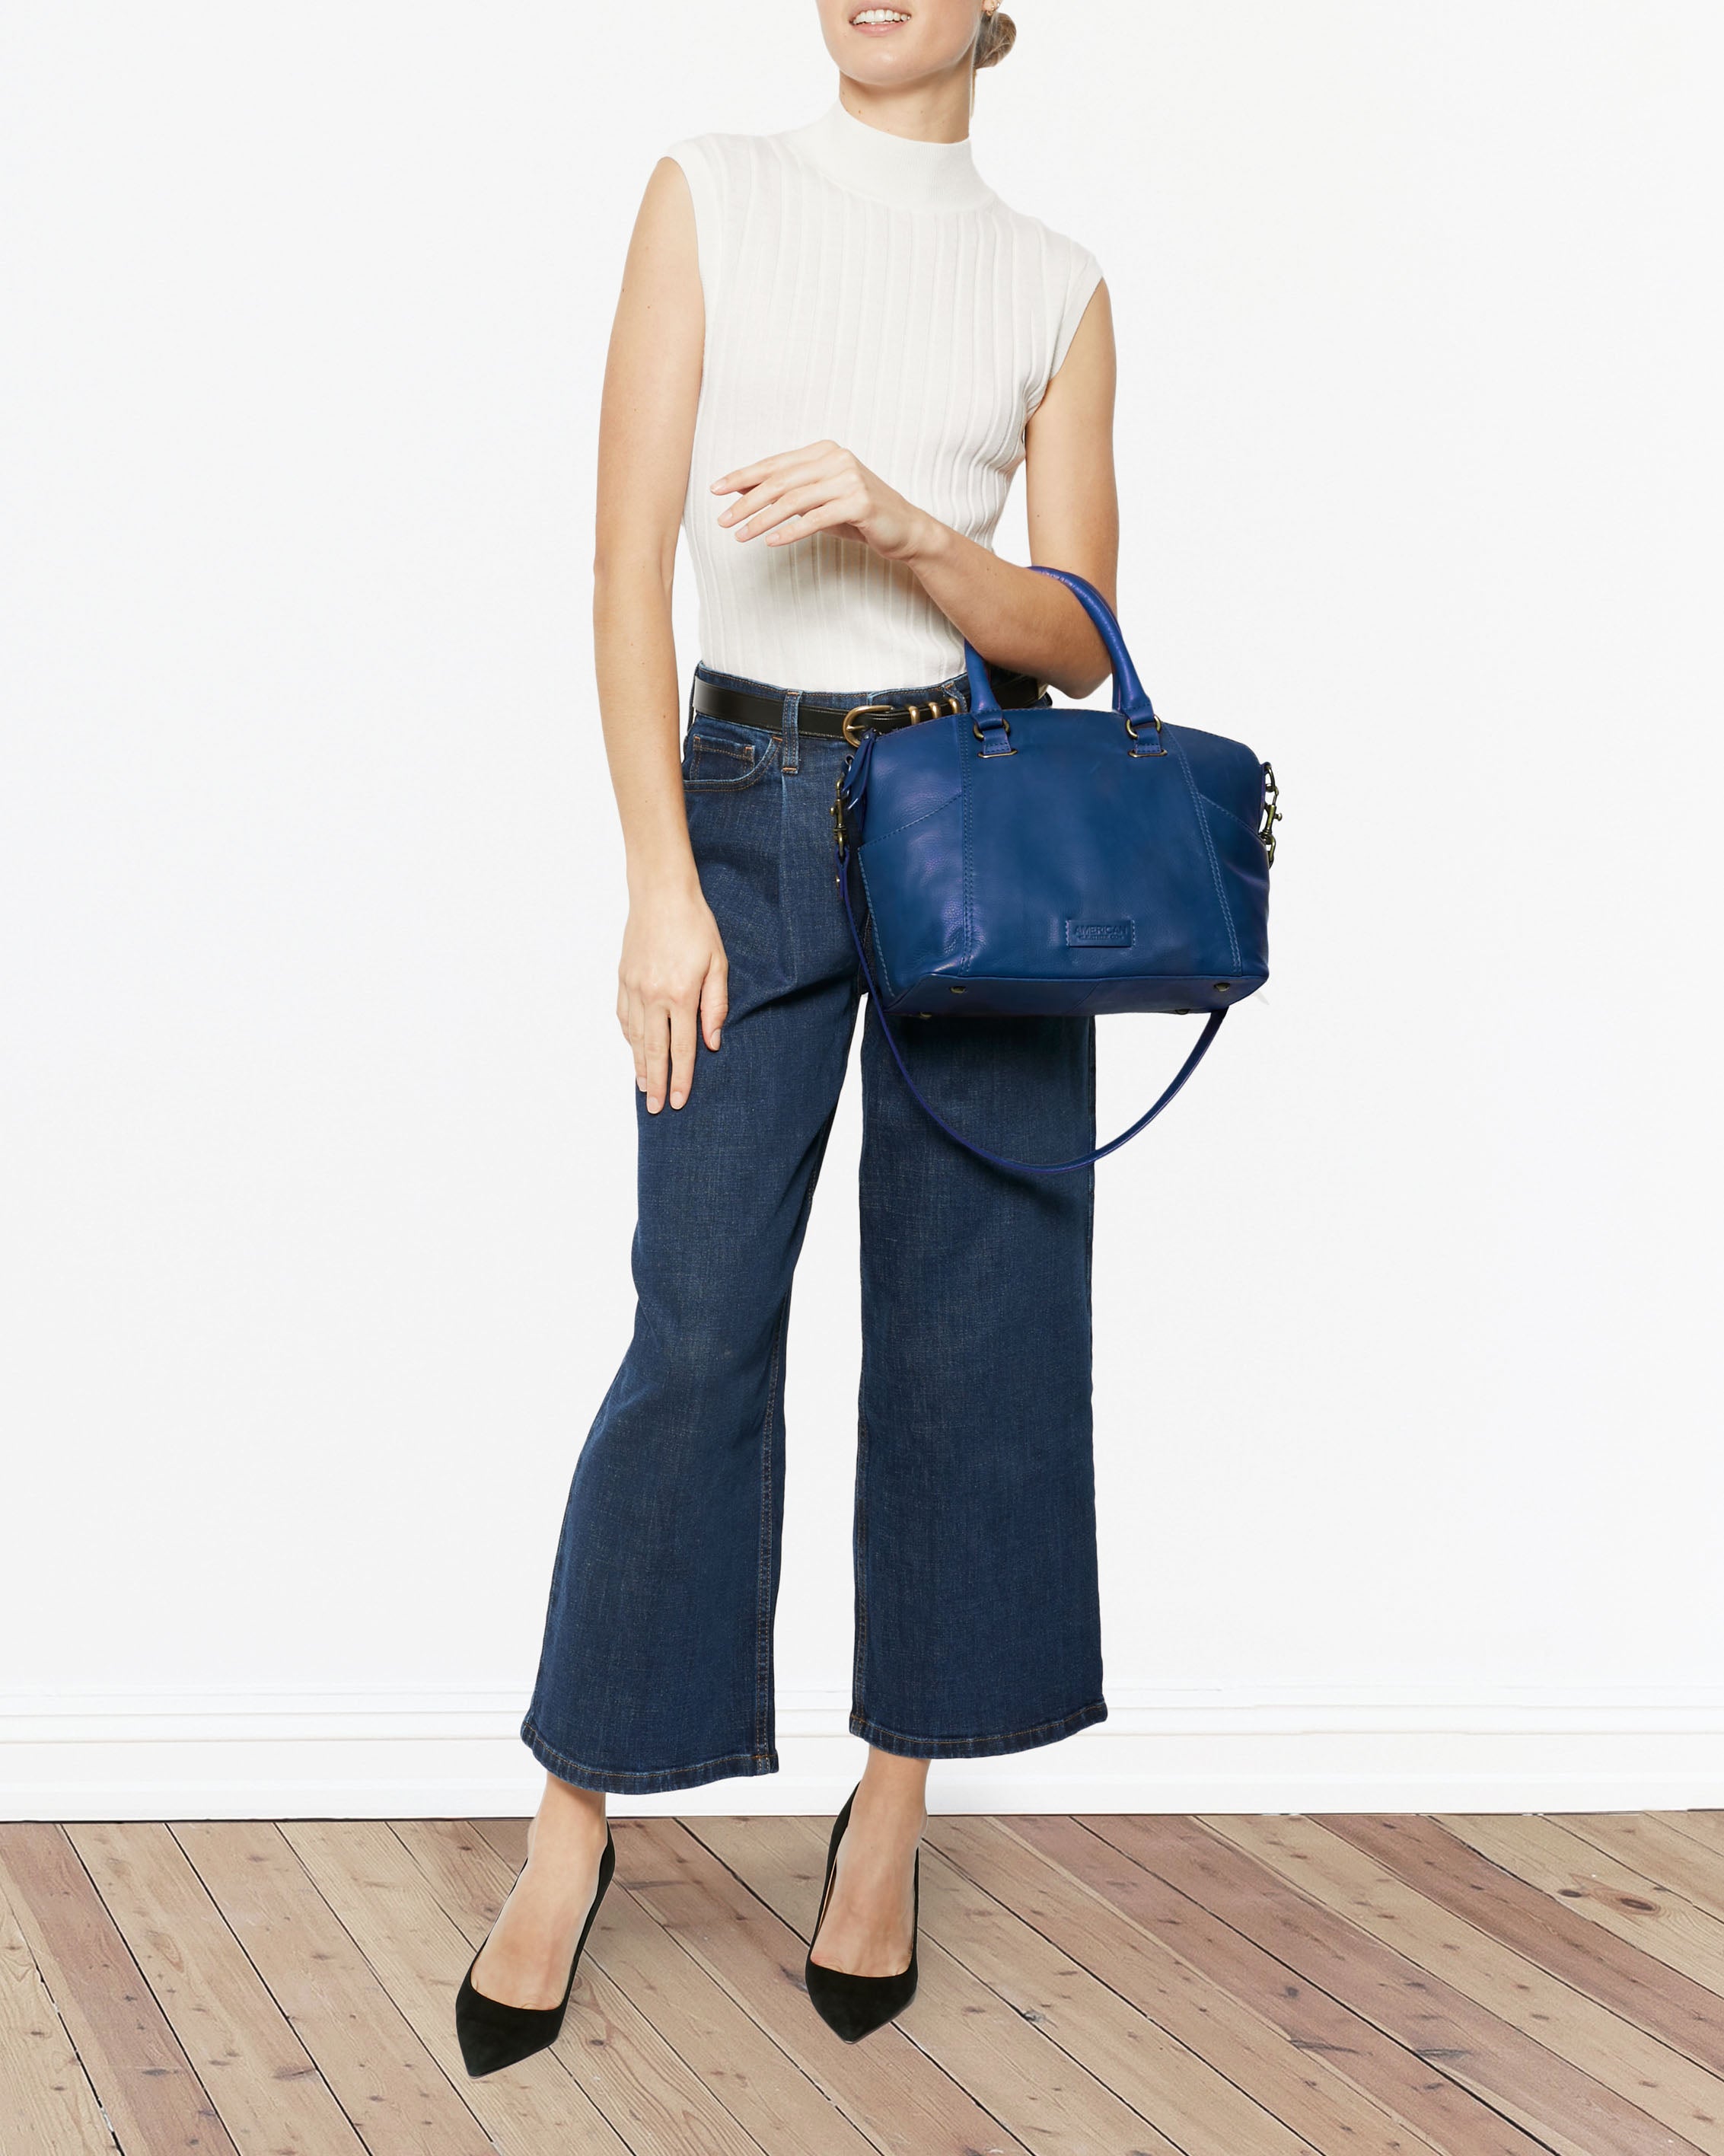 Purses & Leather Goods | American Leather Co.